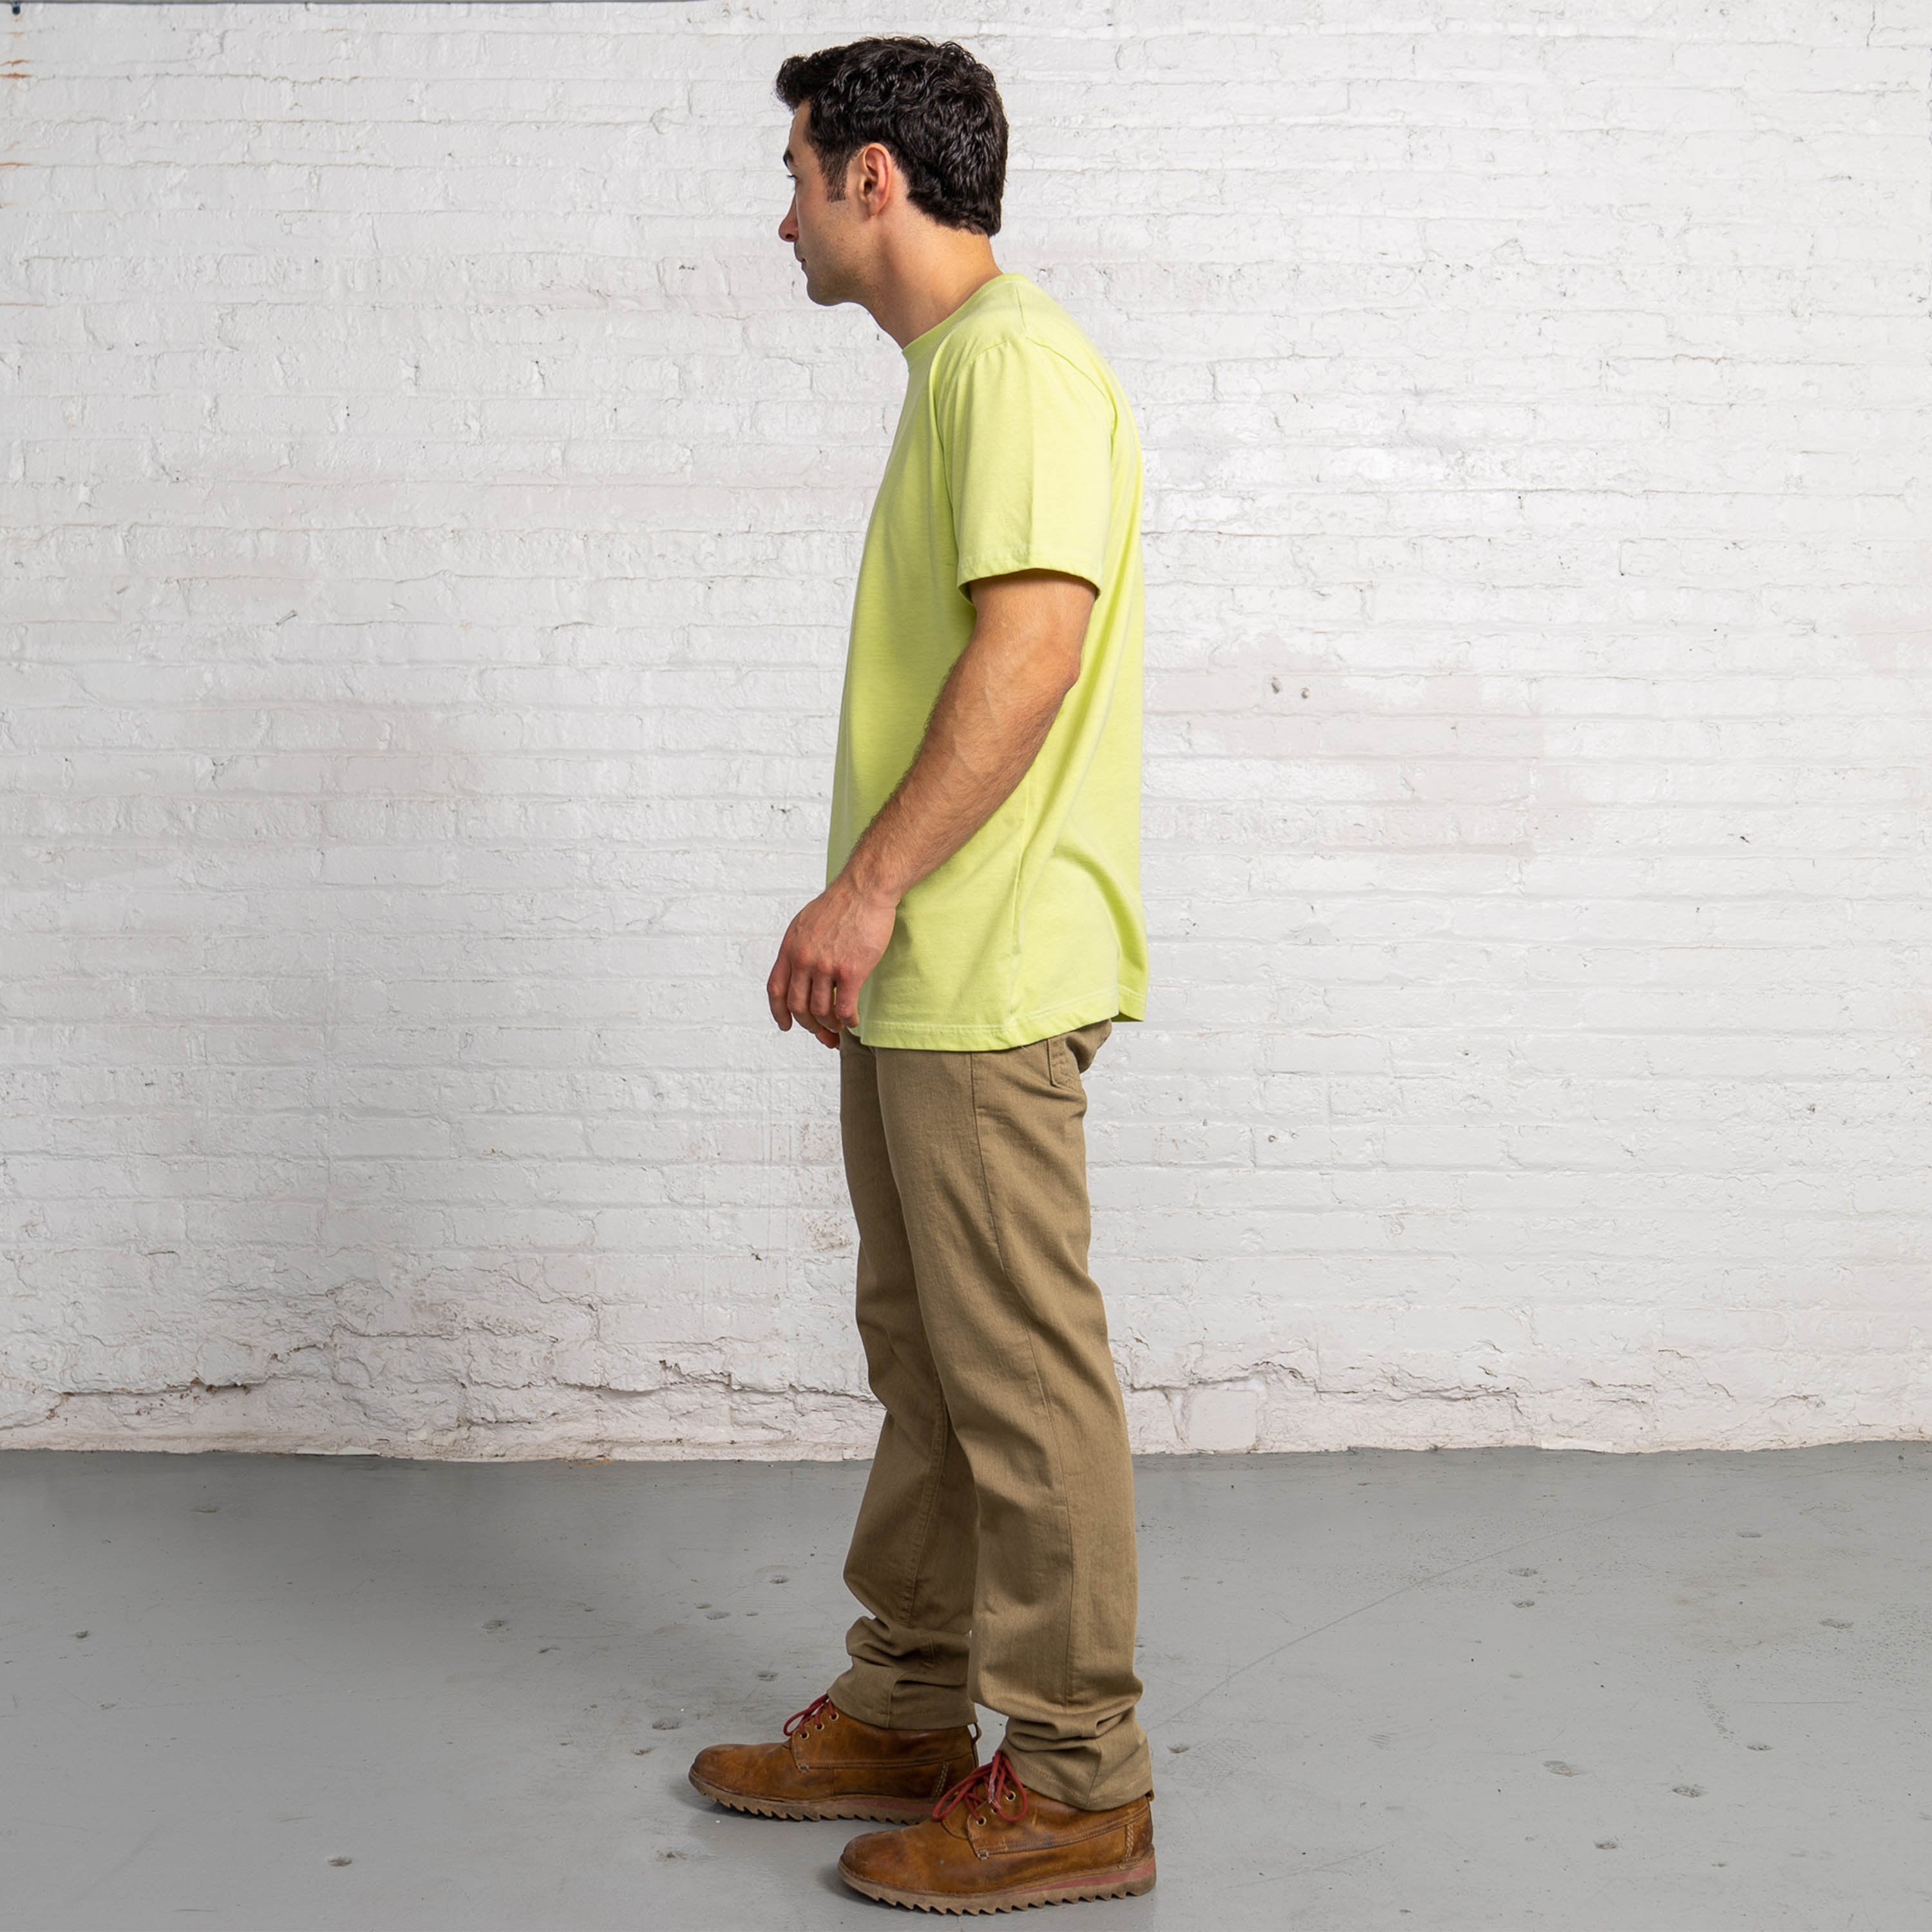 Fitted Color:Light Green Sustainable Cotton New T-shirts